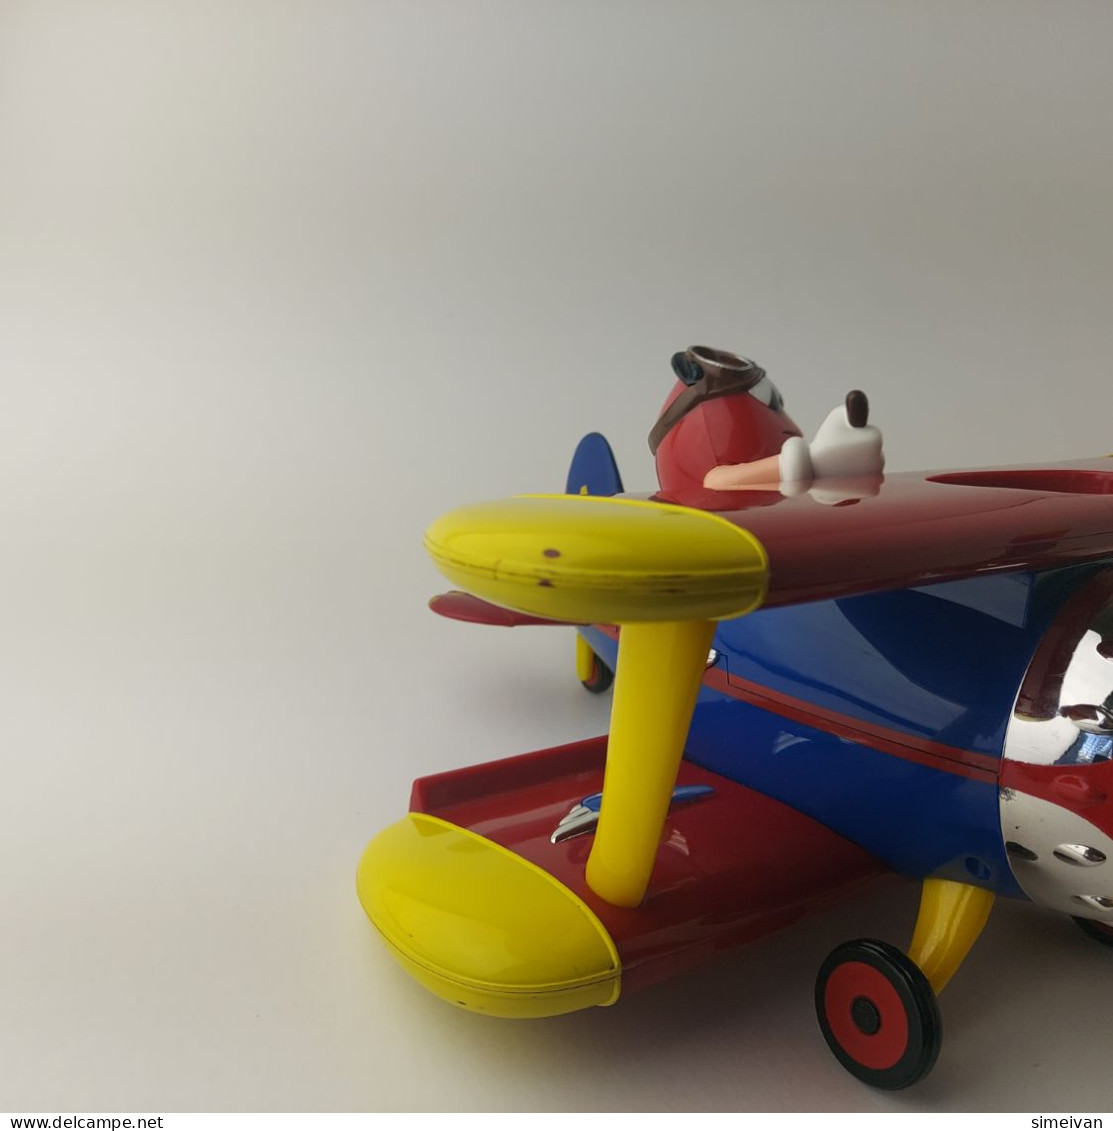 M&Ms Rare Vintage Airplane Candy Sweets Dispenser Biplane Figure M and M #5538